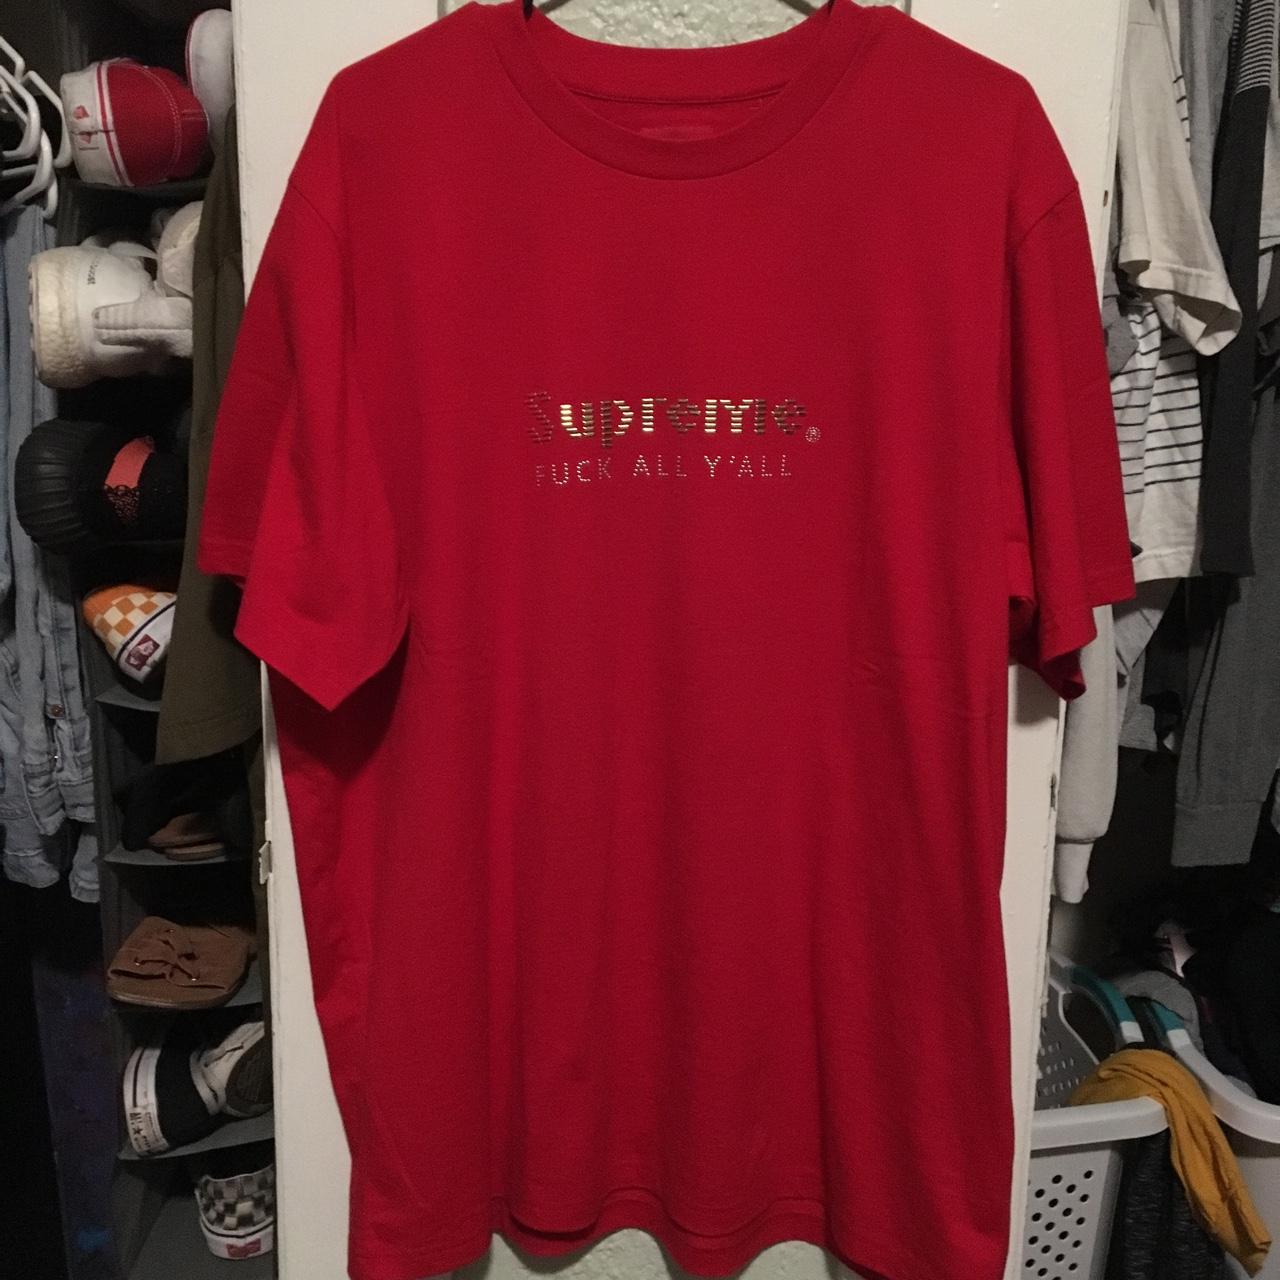 Supreme Fuck All Y’all Tee Shirt Size XL Open to all...